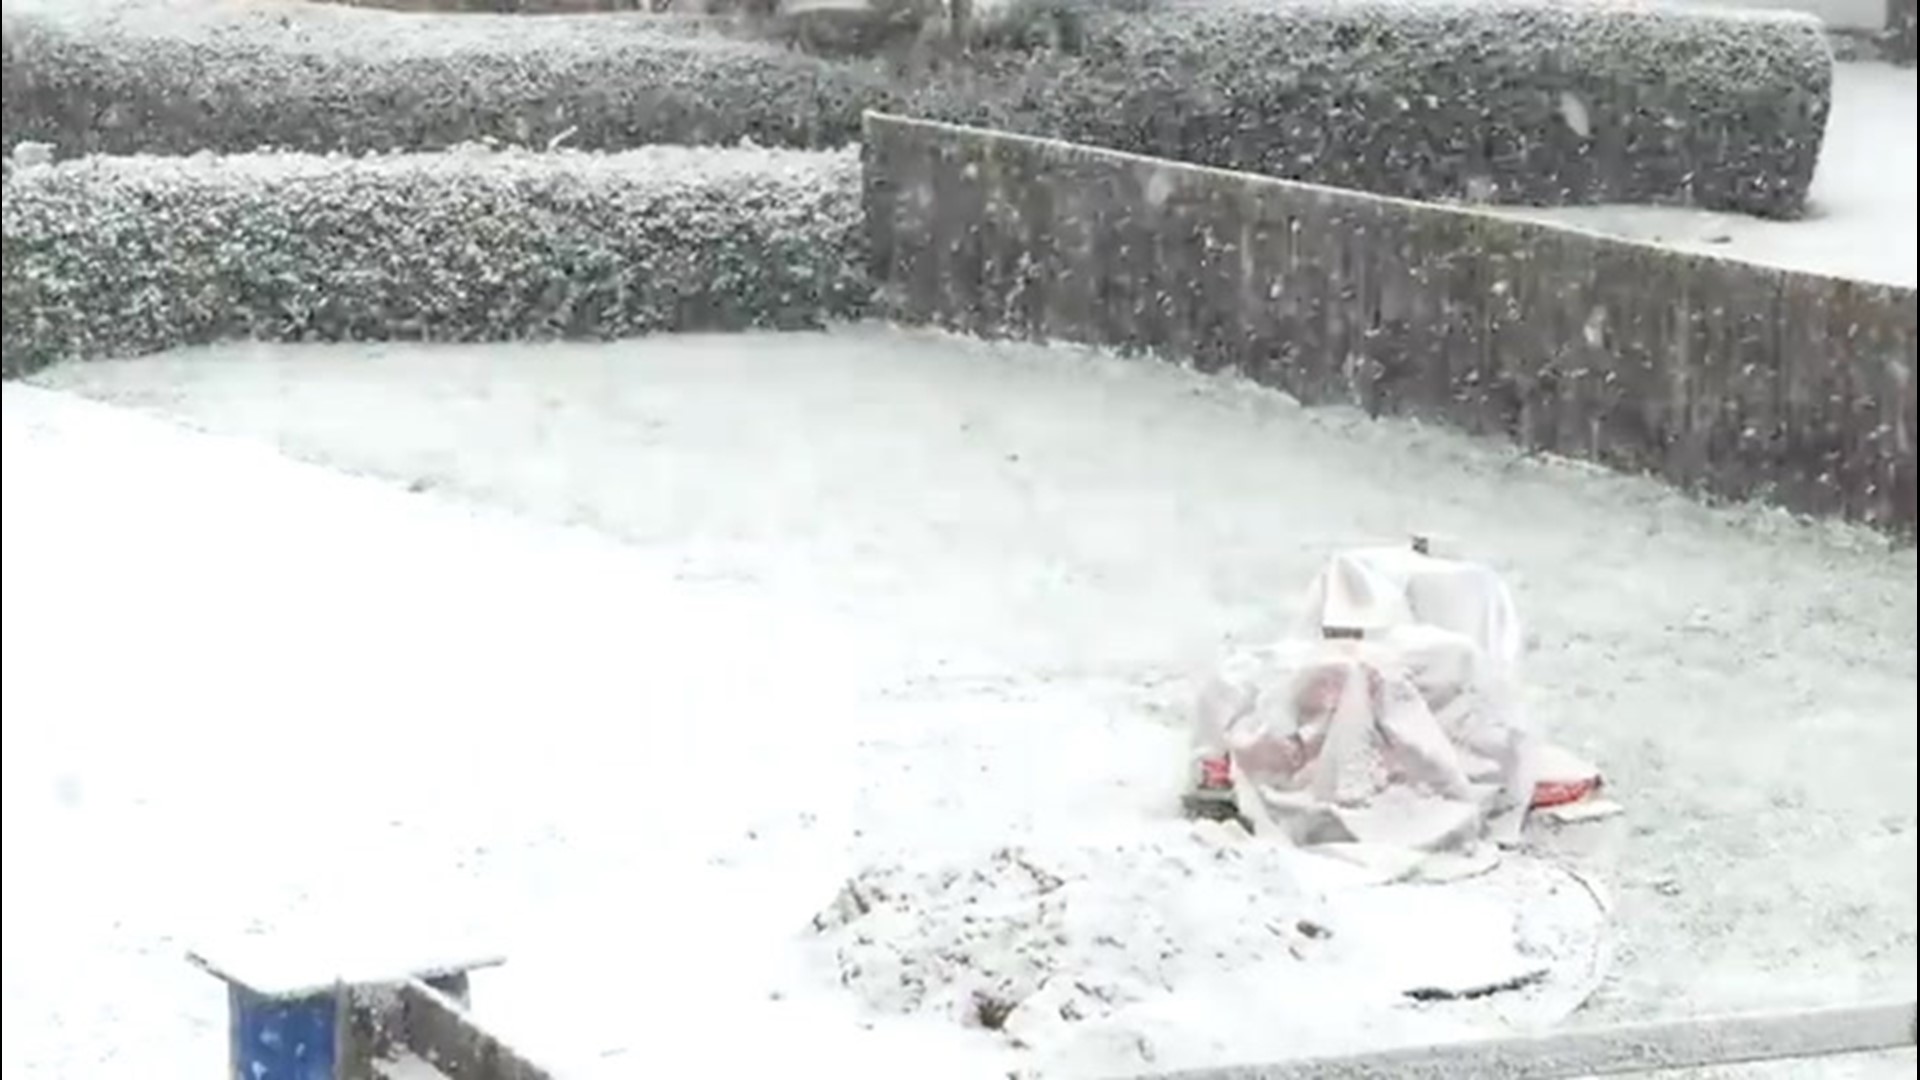 Time-lapse footage captured a snow storm as it moved through Bedford, England, on Jan. 24